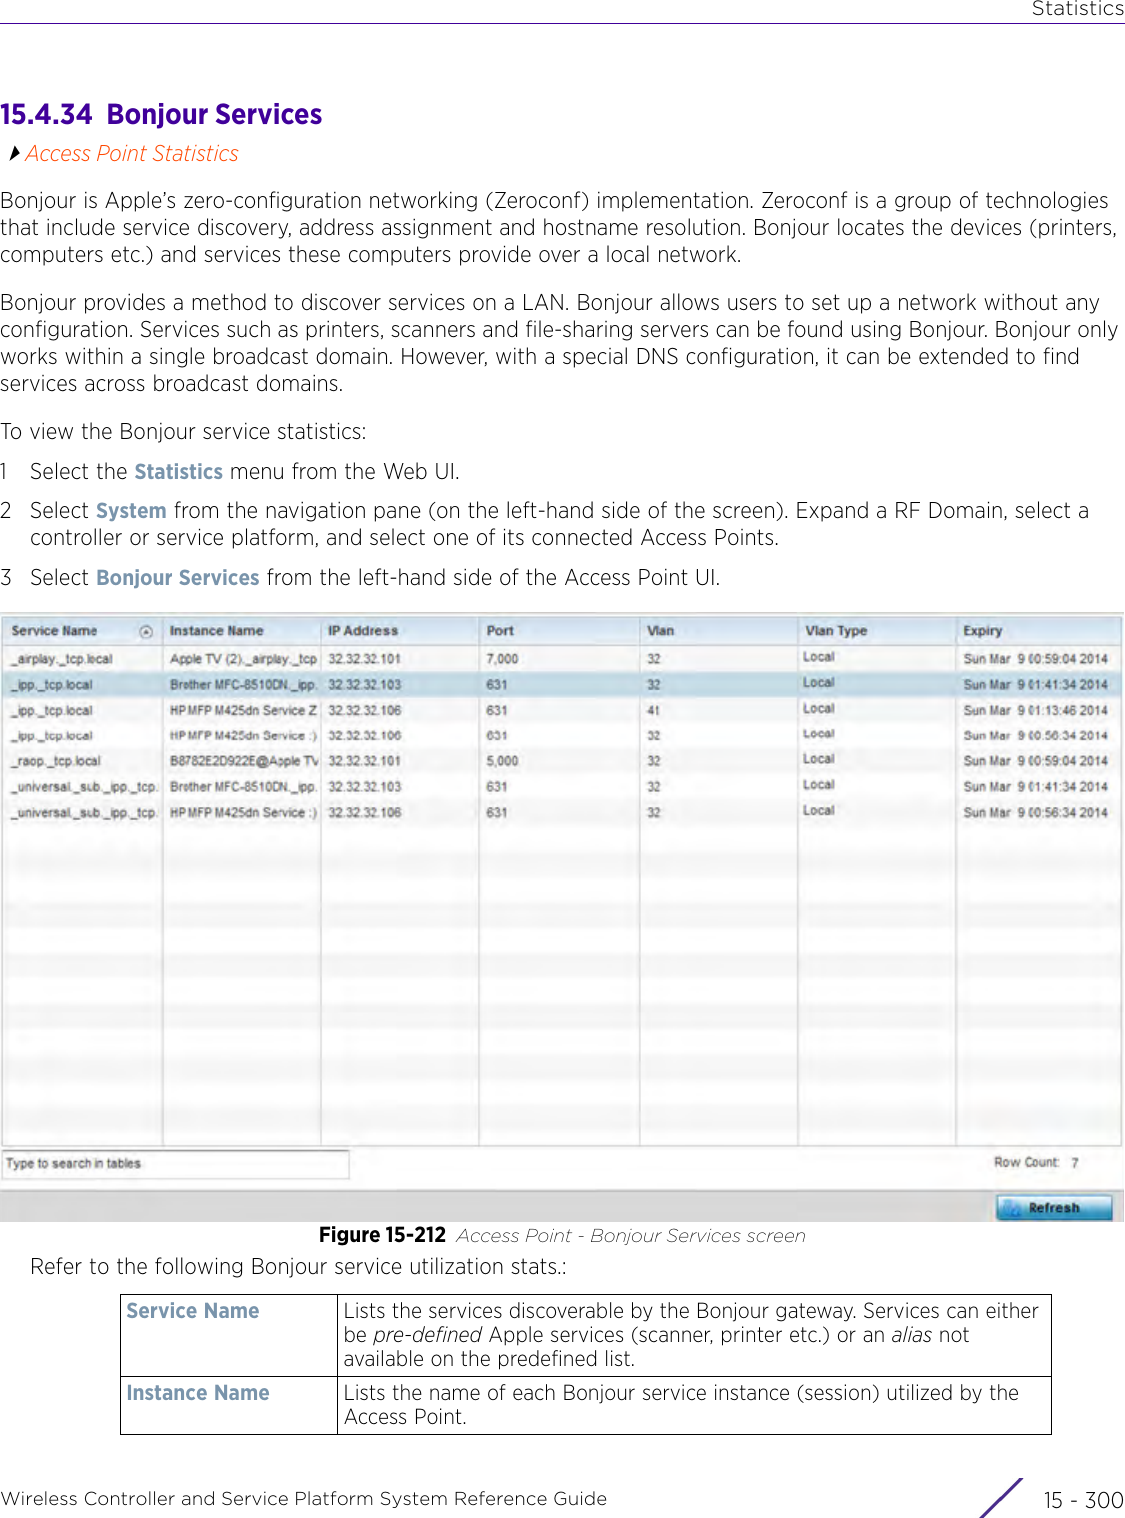 StatisticsWireless Controller and Service Platform System Reference Guide  15 - 30015.4.34  Bonjour ServicesAccess Point StatisticsBonjour is Apple’s zero-configuration networking (Zeroconf) implementation. Zeroconf is a group of technologies that include service discovery, address assignment and hostname resolution. Bonjour locates the devices (printers, computers etc.) and services these computers provide over a local network.Bonjour provides a method to discover services on a LAN. Bonjour allows users to set up a network without any configuration. Services such as printers, scanners and file-sharing servers can be found using Bonjour. Bonjour only works within a single broadcast domain. However, with a special DNS configuration, it can be extended to find services across broadcast domains.To view the Bonjour service statistics:1 Select the Statistics menu from the Web UI.2Select System from the navigation pane (on the left-hand side of the screen). Expand a RF Domain, select a controller or service platform, and select one of its connected Access Points.3Select Bonjour Services from the left-hand side of the Access Point UI.Figure 15-212 Access Point - Bonjour Services screenRefer to the following Bonjour service utilization stats.:Service Name Lists the services discoverable by the Bonjour gateway. Services can either be pre-defined Apple services (scanner, printer etc.) or an alias not available on the predefined list.Instance Name Lists the name of each Bonjour service instance (session) utilized by the Access Point.